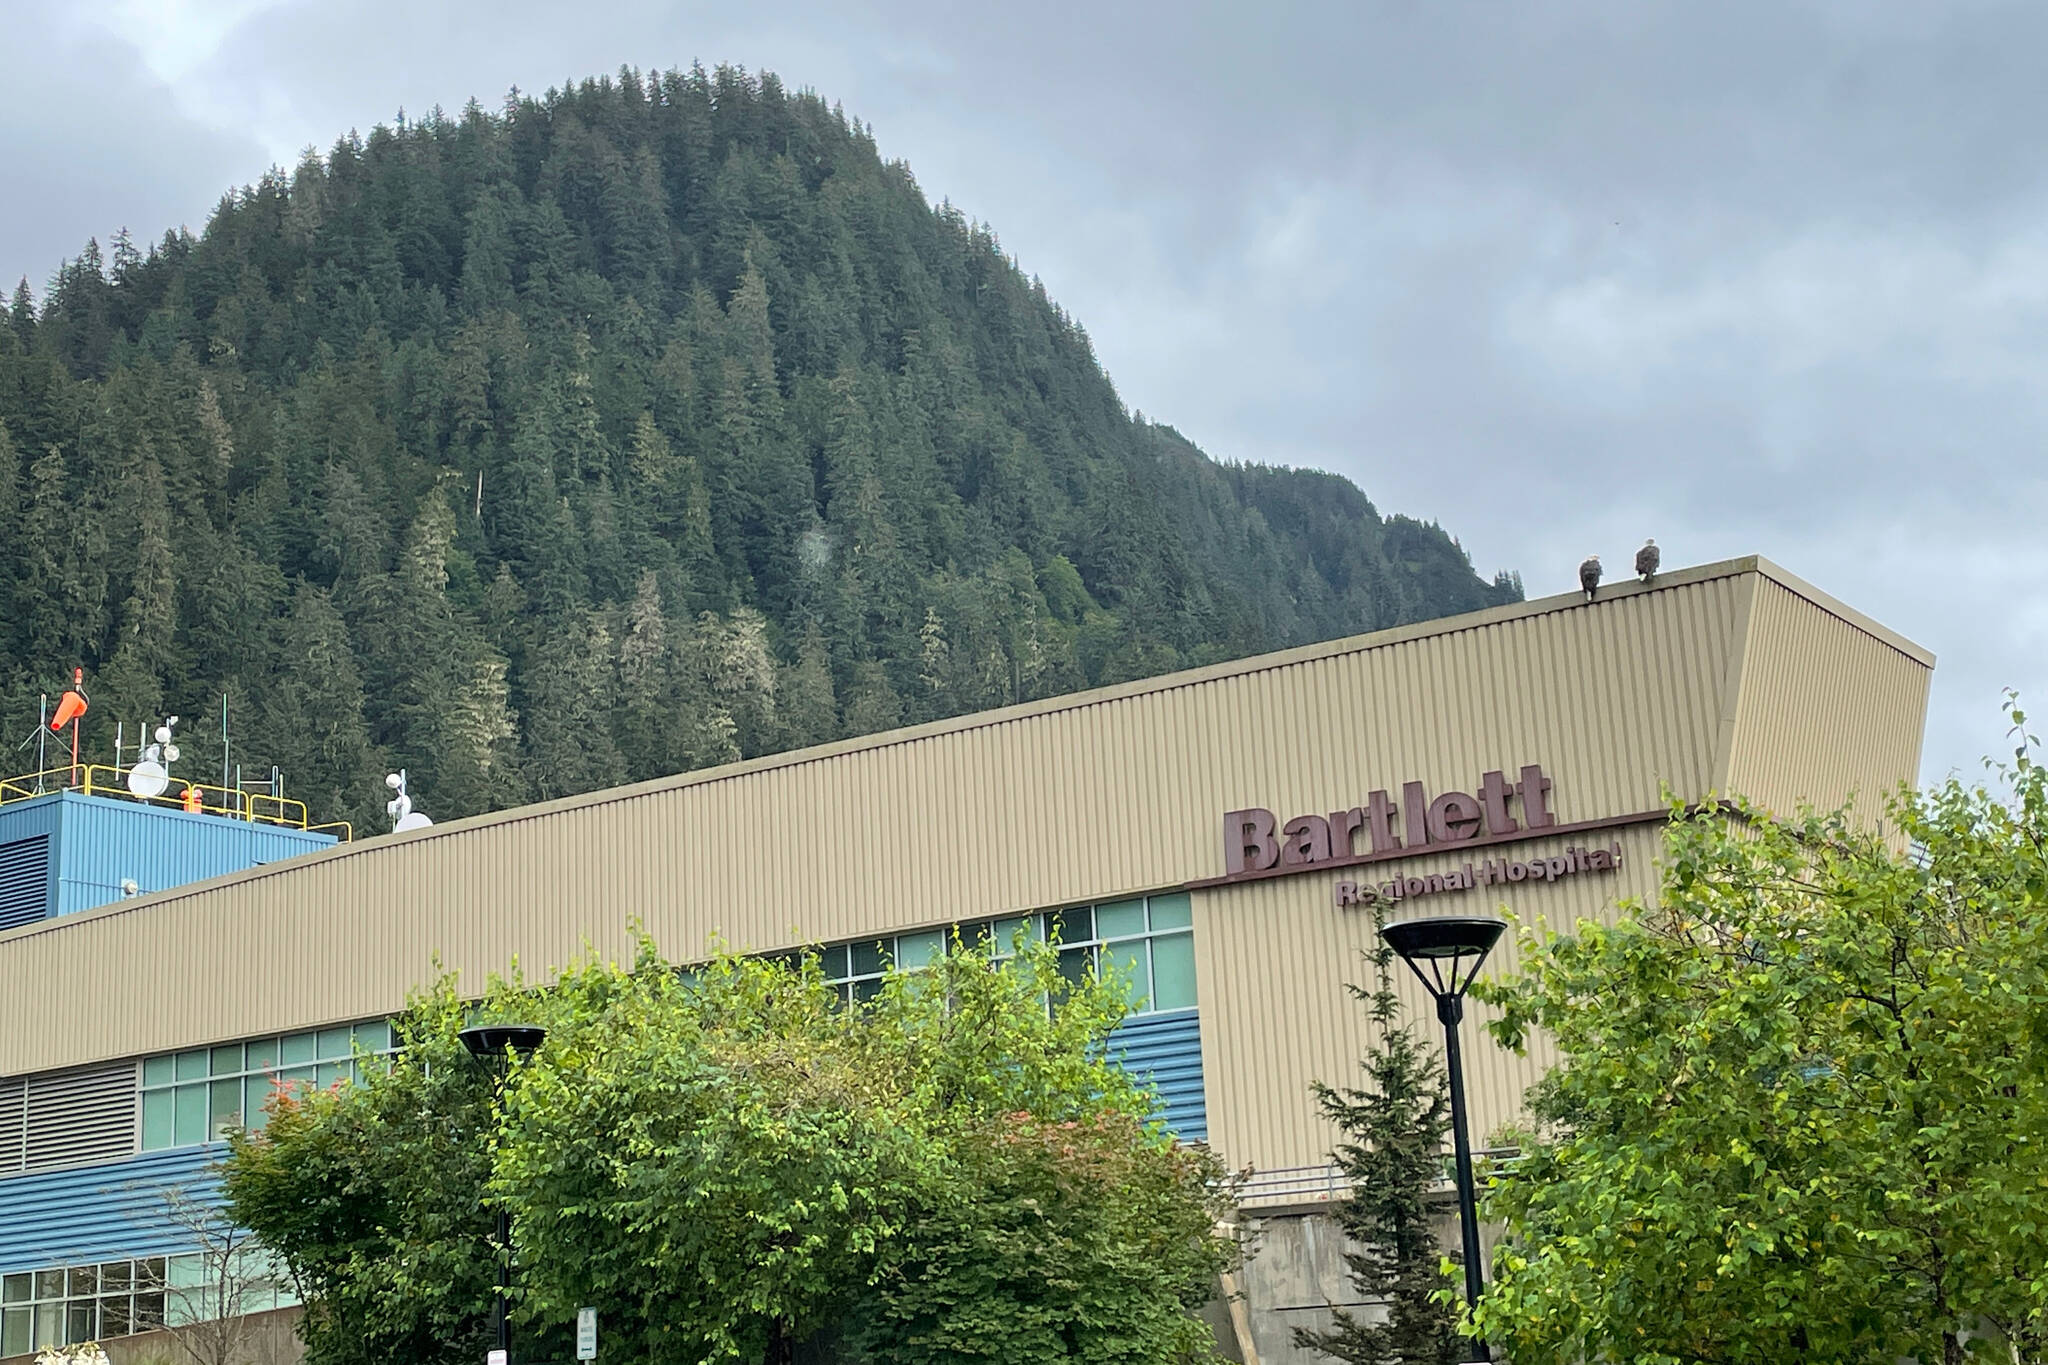 Bartlett Regional Hospital's Chief Financial Officer has resigned, according to hospital officials. Benson is the third executive to resign from BRH in the last four months. (Michael S. Lockett / Juneau Empire)